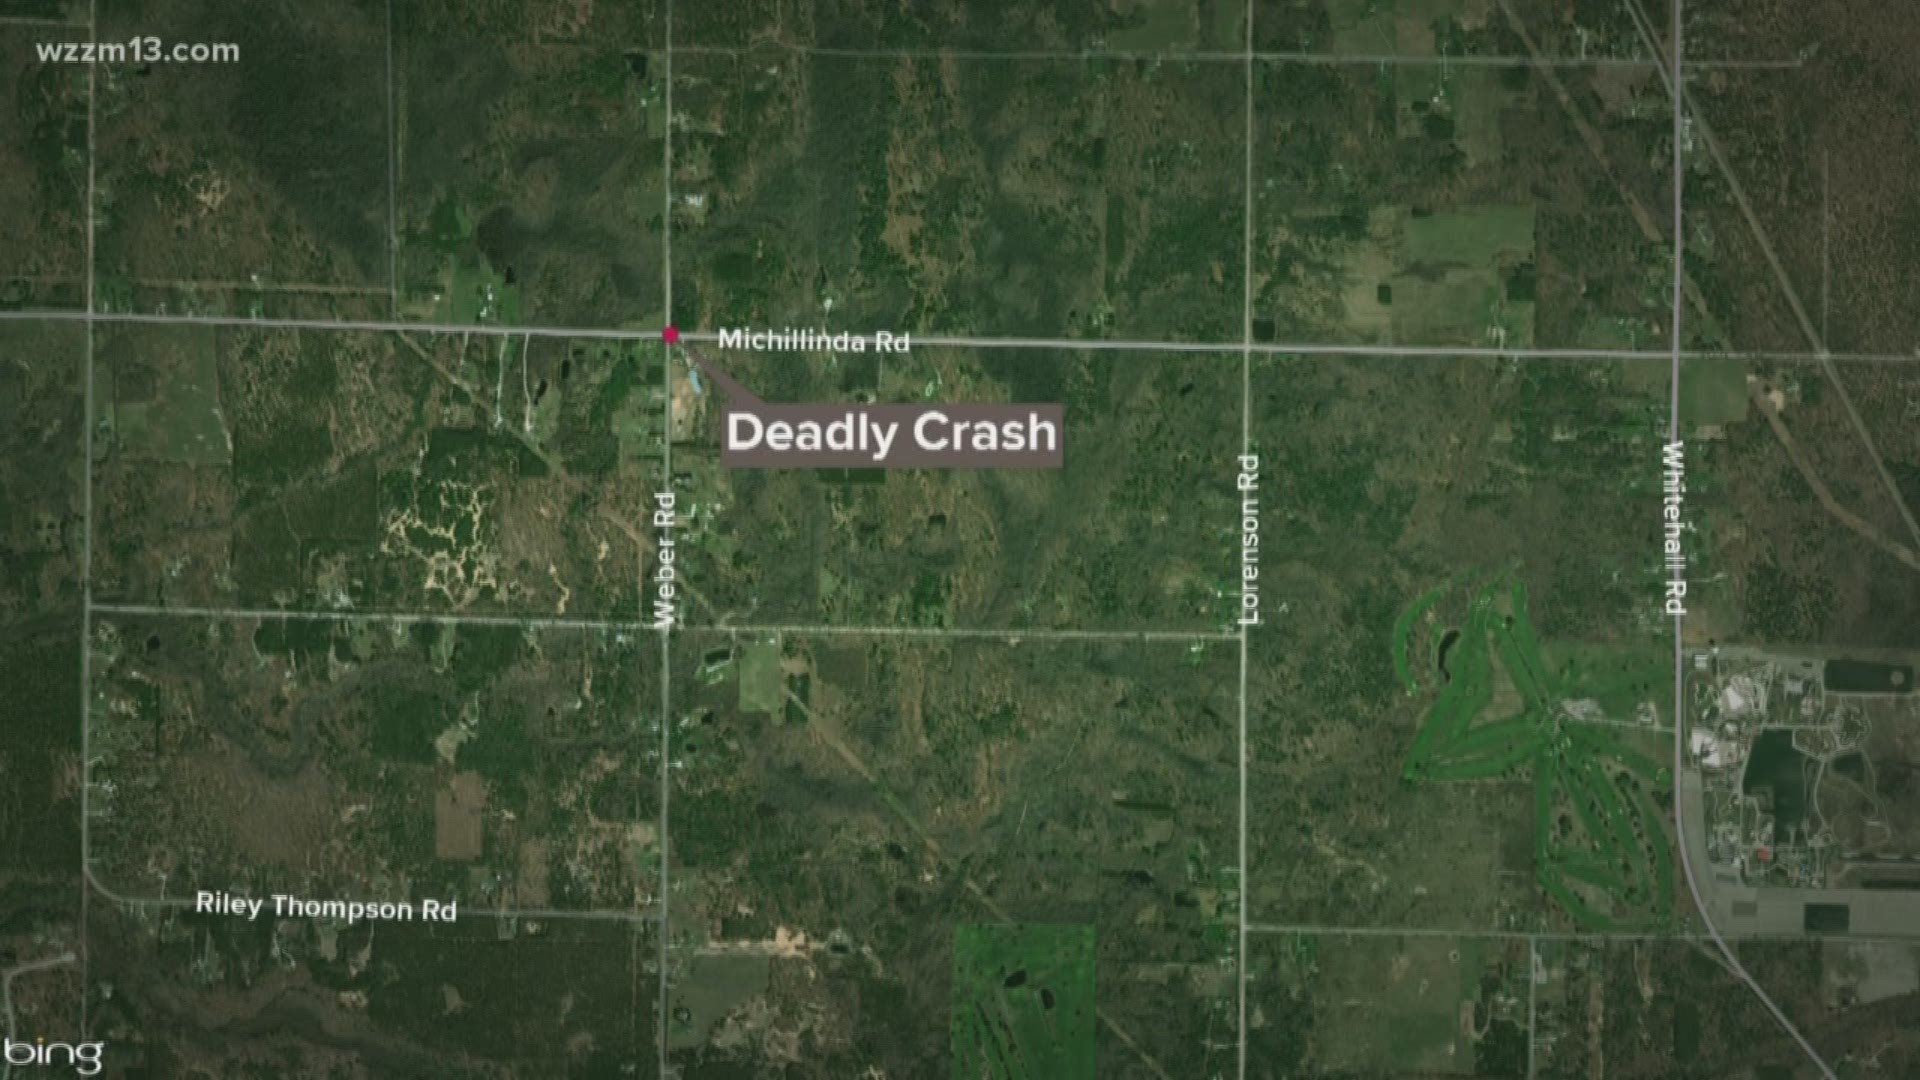 A husband and wife were killed in the crash that happened Sunday afternoon.